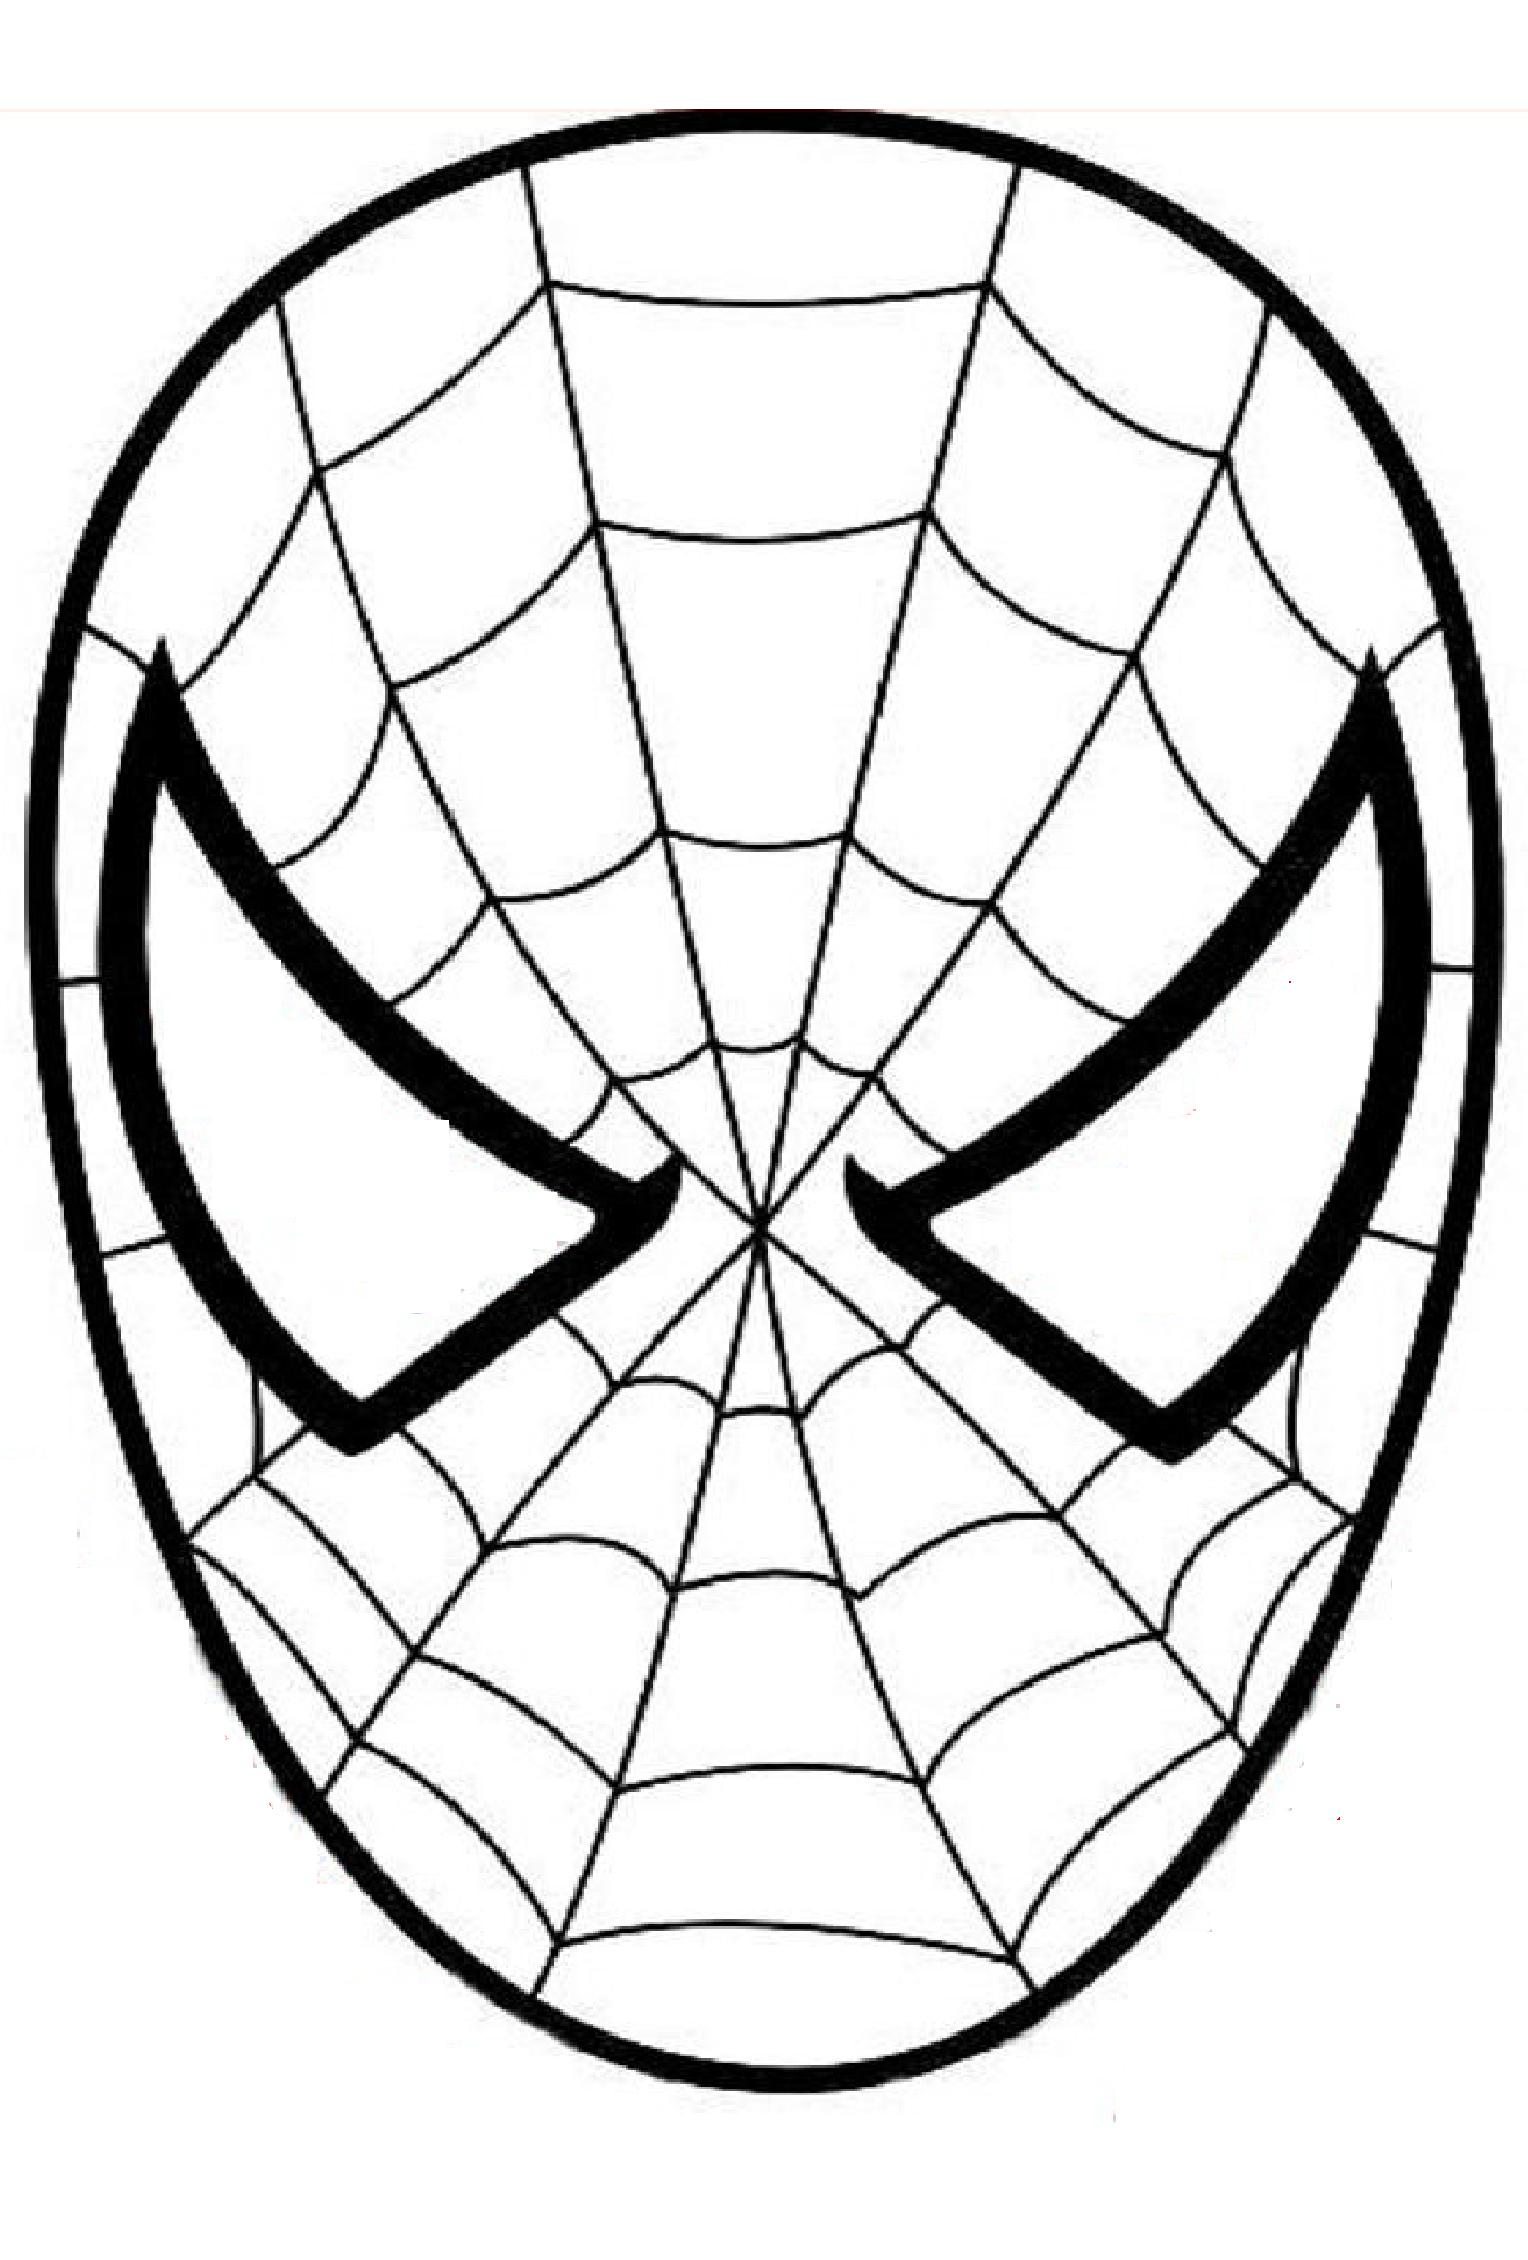 Image of Spiderman to download and color - Spider-Man Kids Coloring Pages